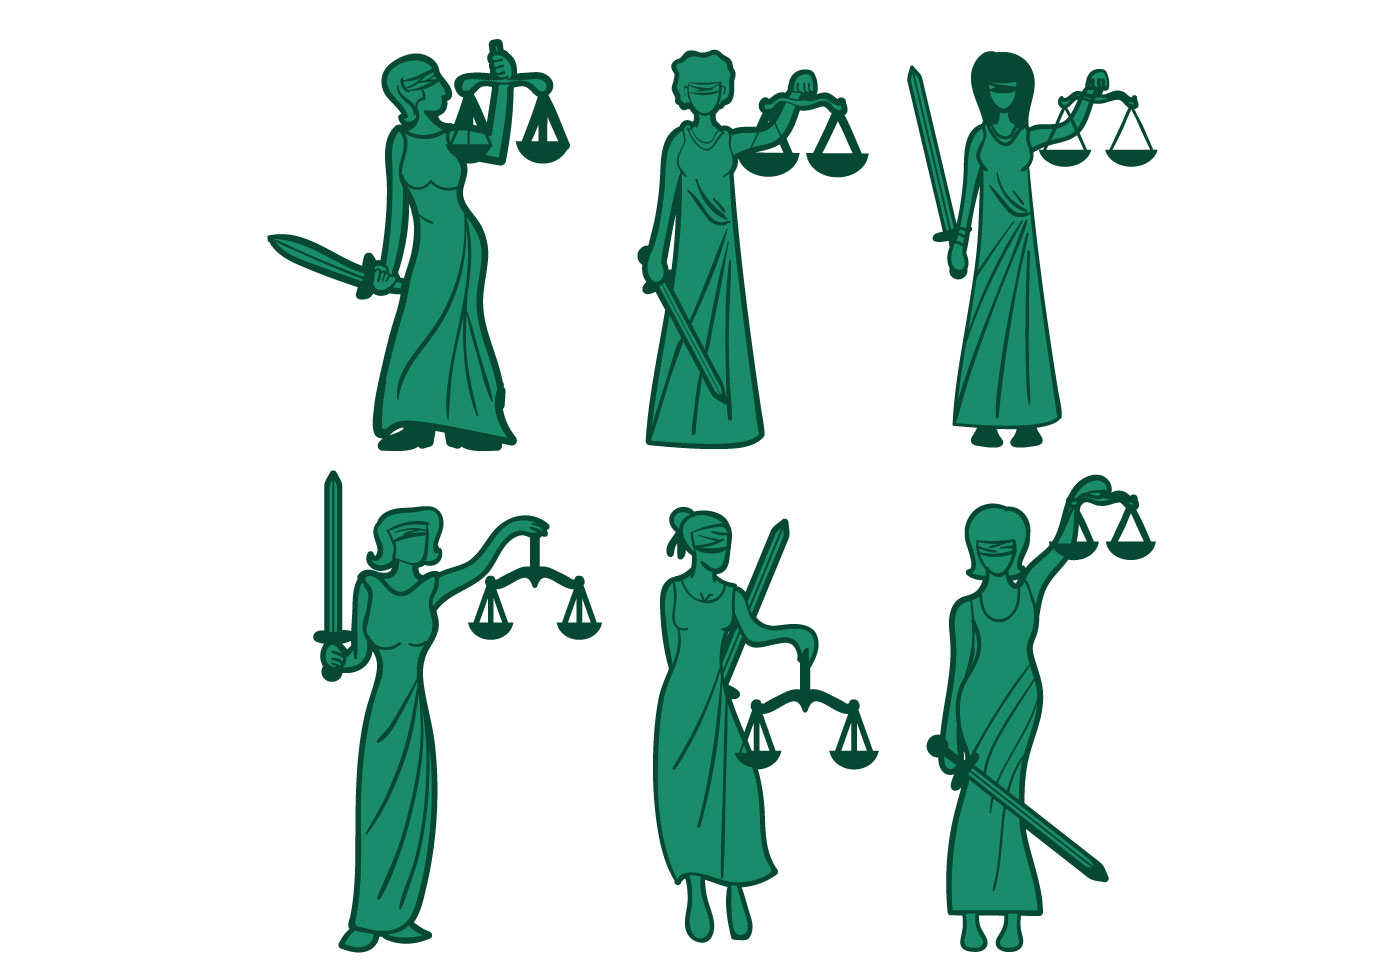 Lady Justice Vector - Download Free Vector Art, Stock Graphics ...